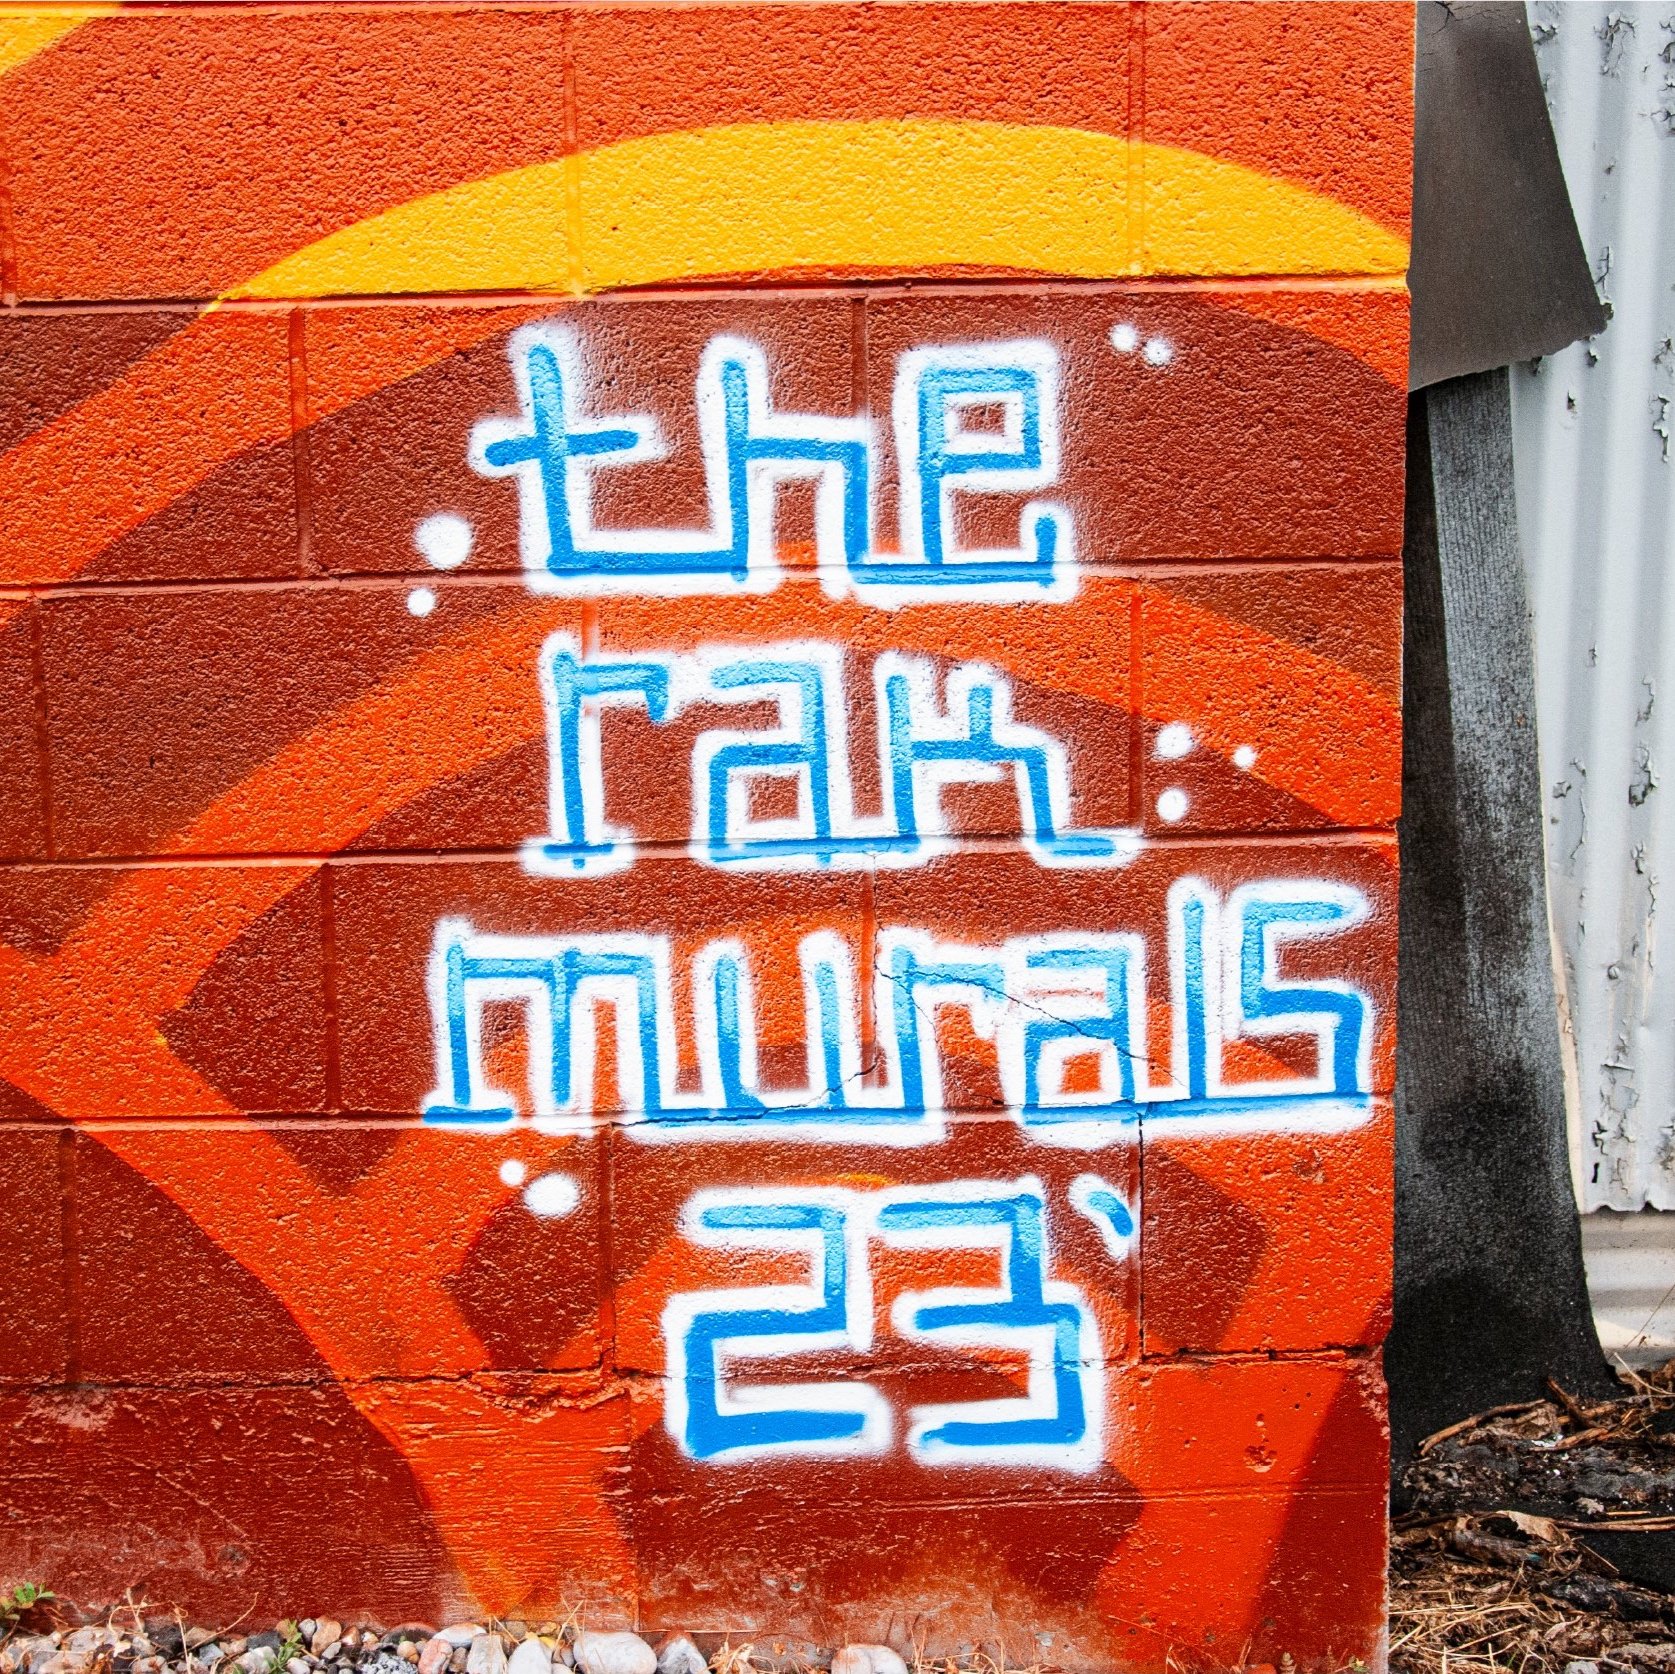 Tag+in+2023+Folsom+Trail+Mural+Project+by+Roots+Art+Kollective+in+Salt+Lake+City.jpg